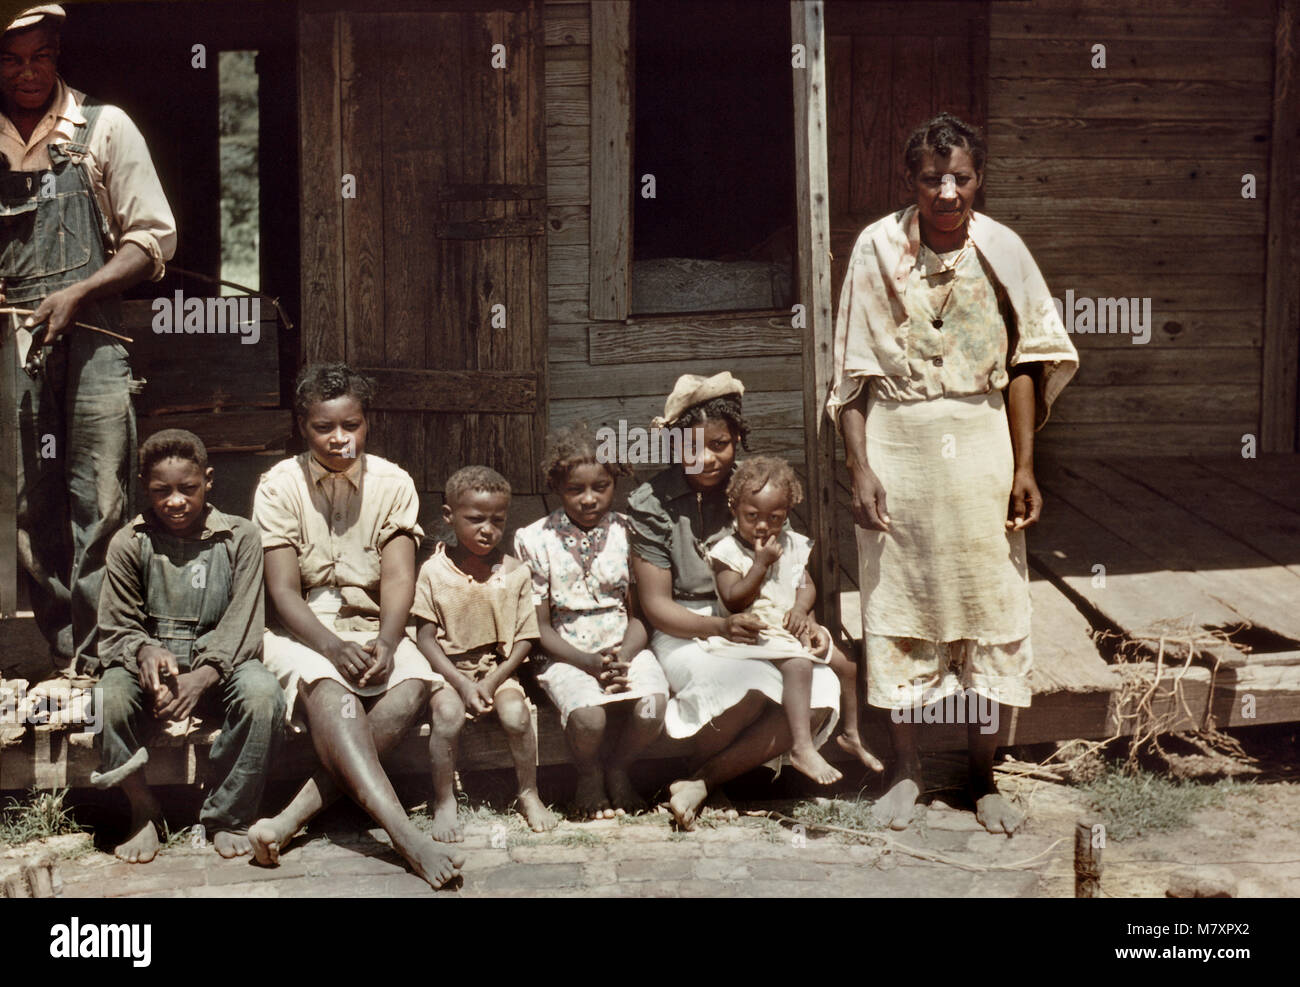 Family Portrait on Porch, Bayou Bourbeau Plantation, FSA, Cooperative, Natchitoches, Louisiana, USA, Marion Post Wolcott for Farm Security Administration, August 1940 Stock Photo